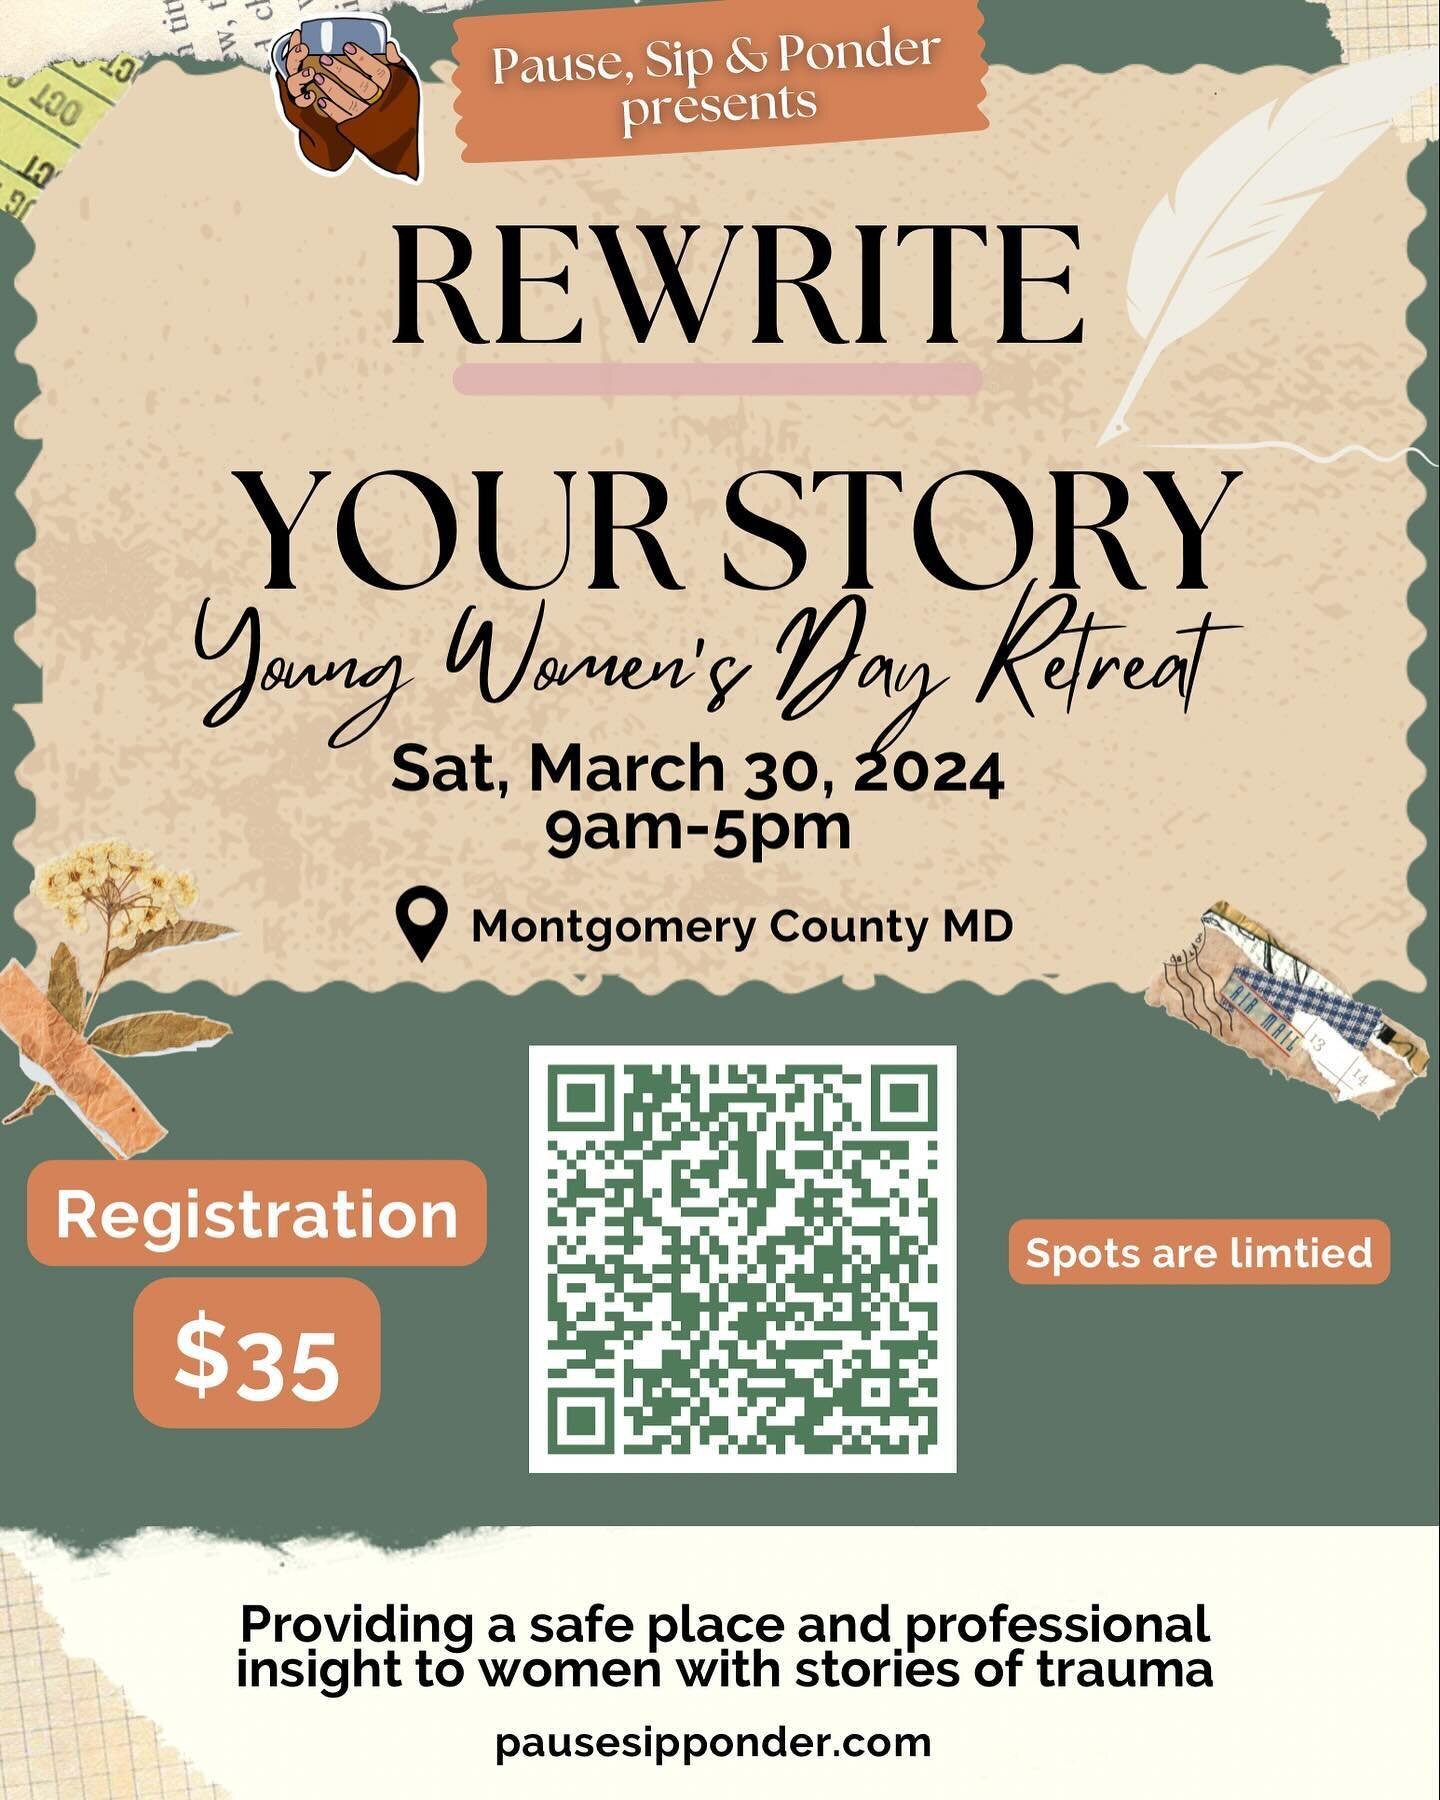 Hi Ponderers, just a friendly reminder that the &lsquo;Rewrite Your Story&rsquo; Young Women Retreat REGISTRATION is still open! This retreat is designed to be a safe and supportive space for those who have experienced trauma or would like to learn a